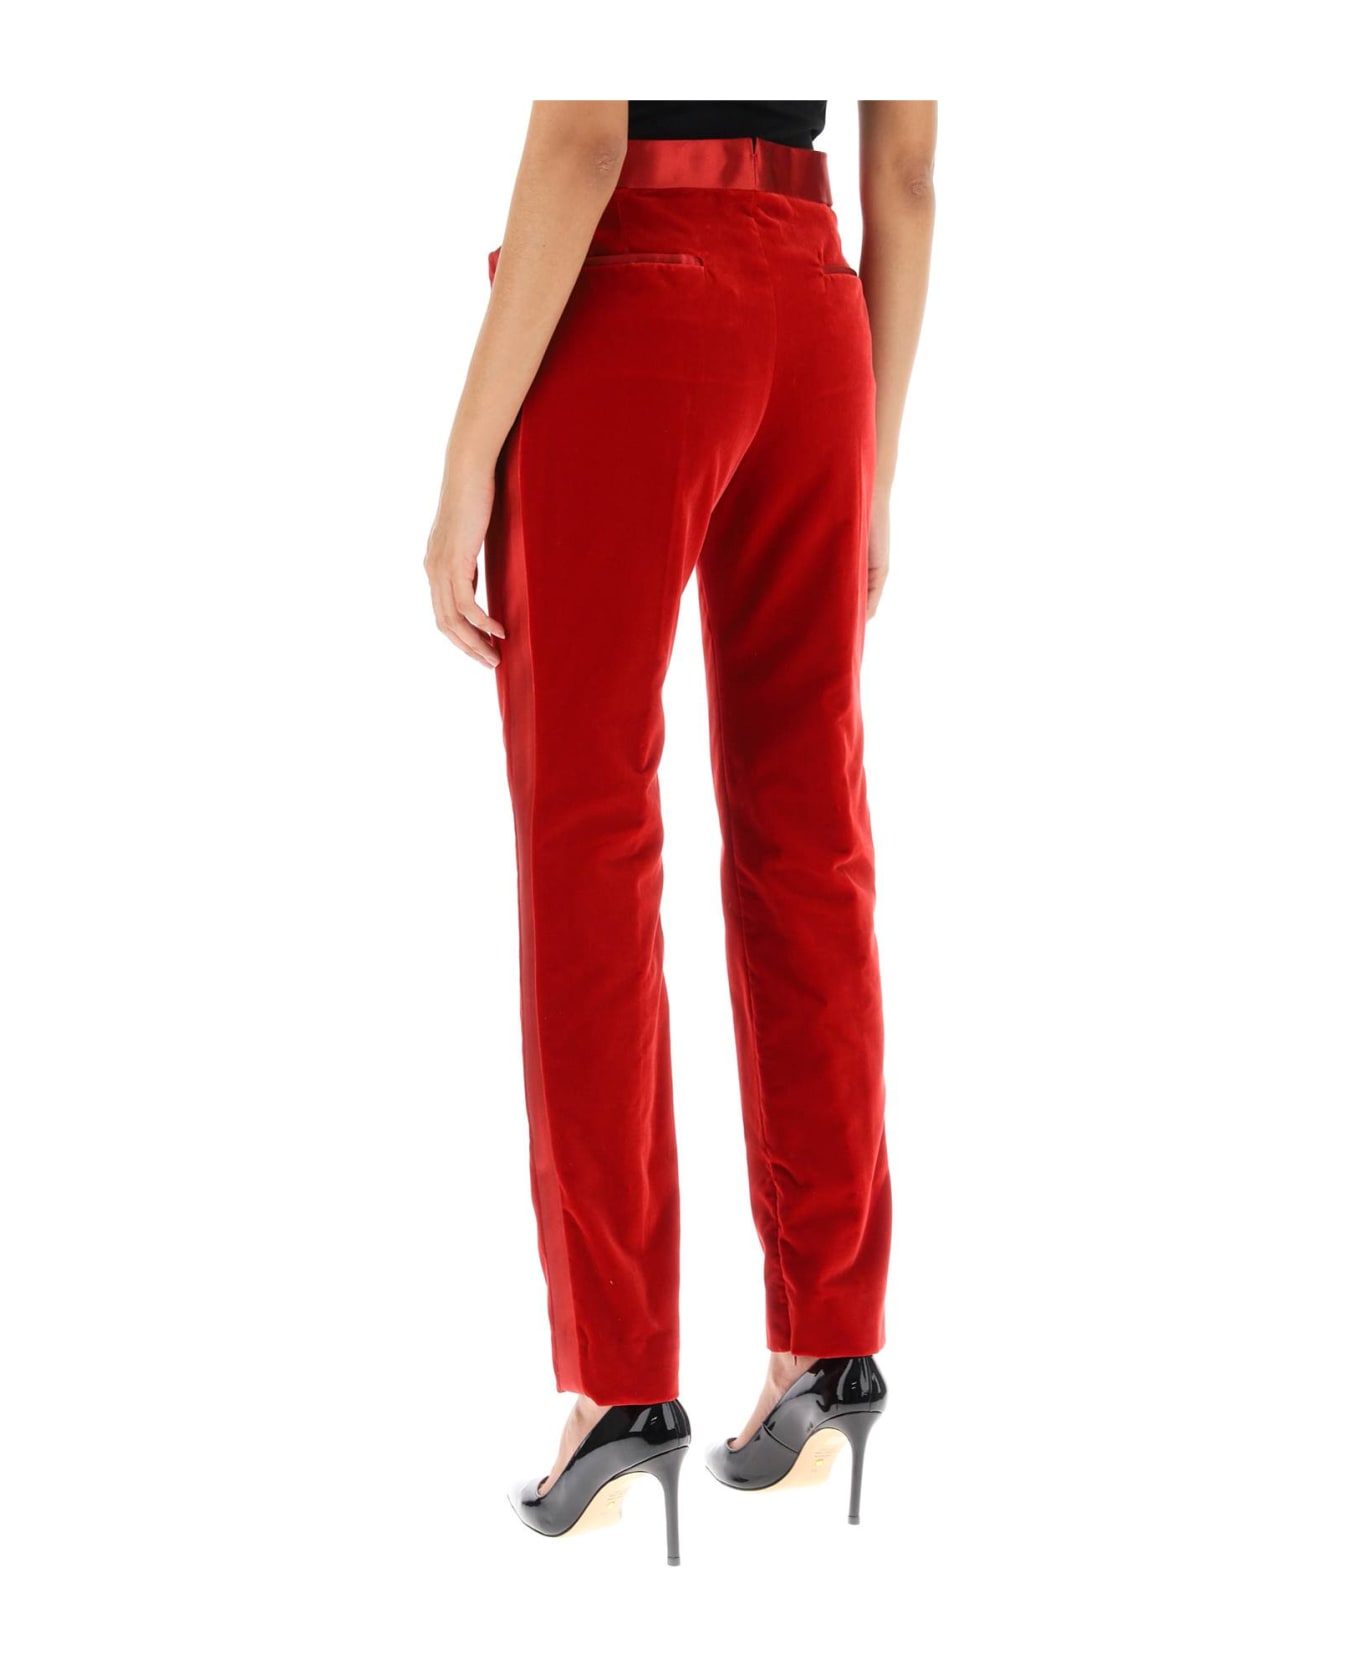 Tom Ford Velvet Pants With Satin Bands - RED (Red) ボトムス